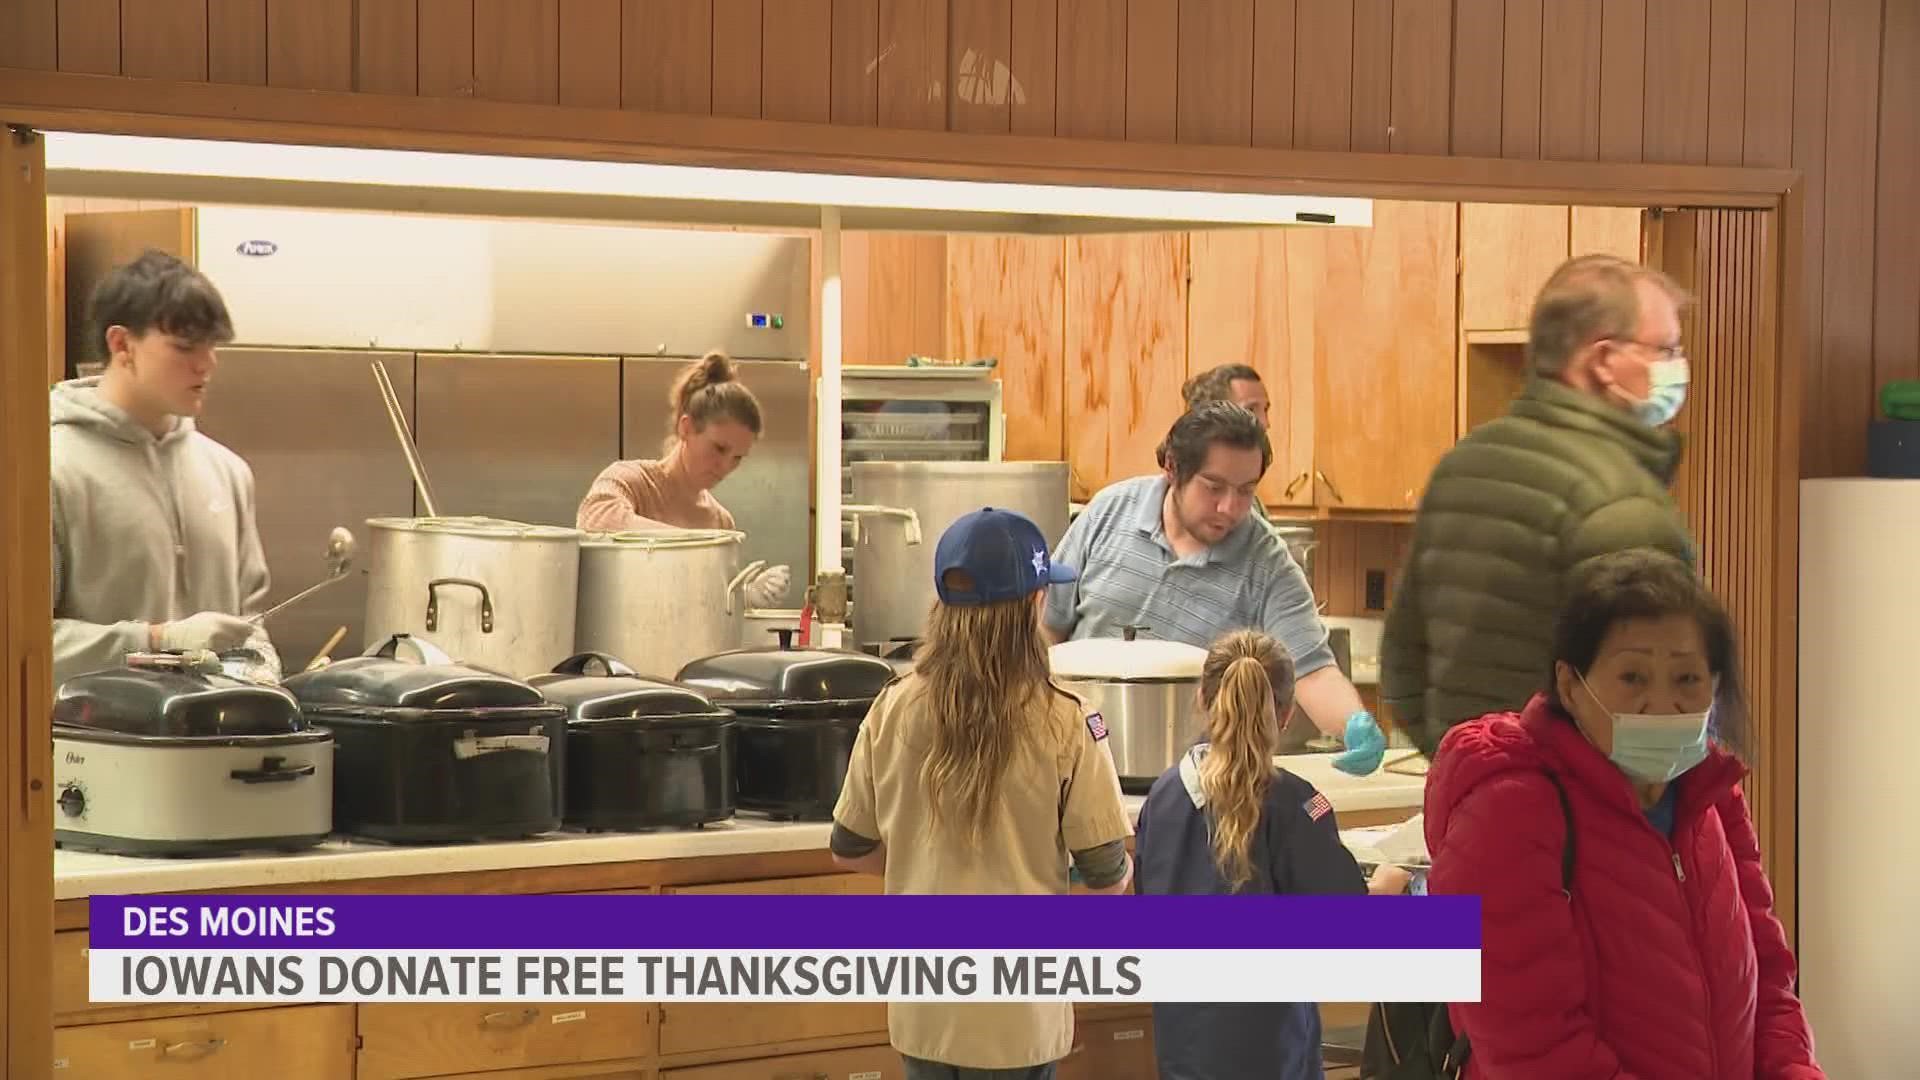 A giveaway through the South Gate Masons Lodge served almost 1,000 meals, according to organizers.